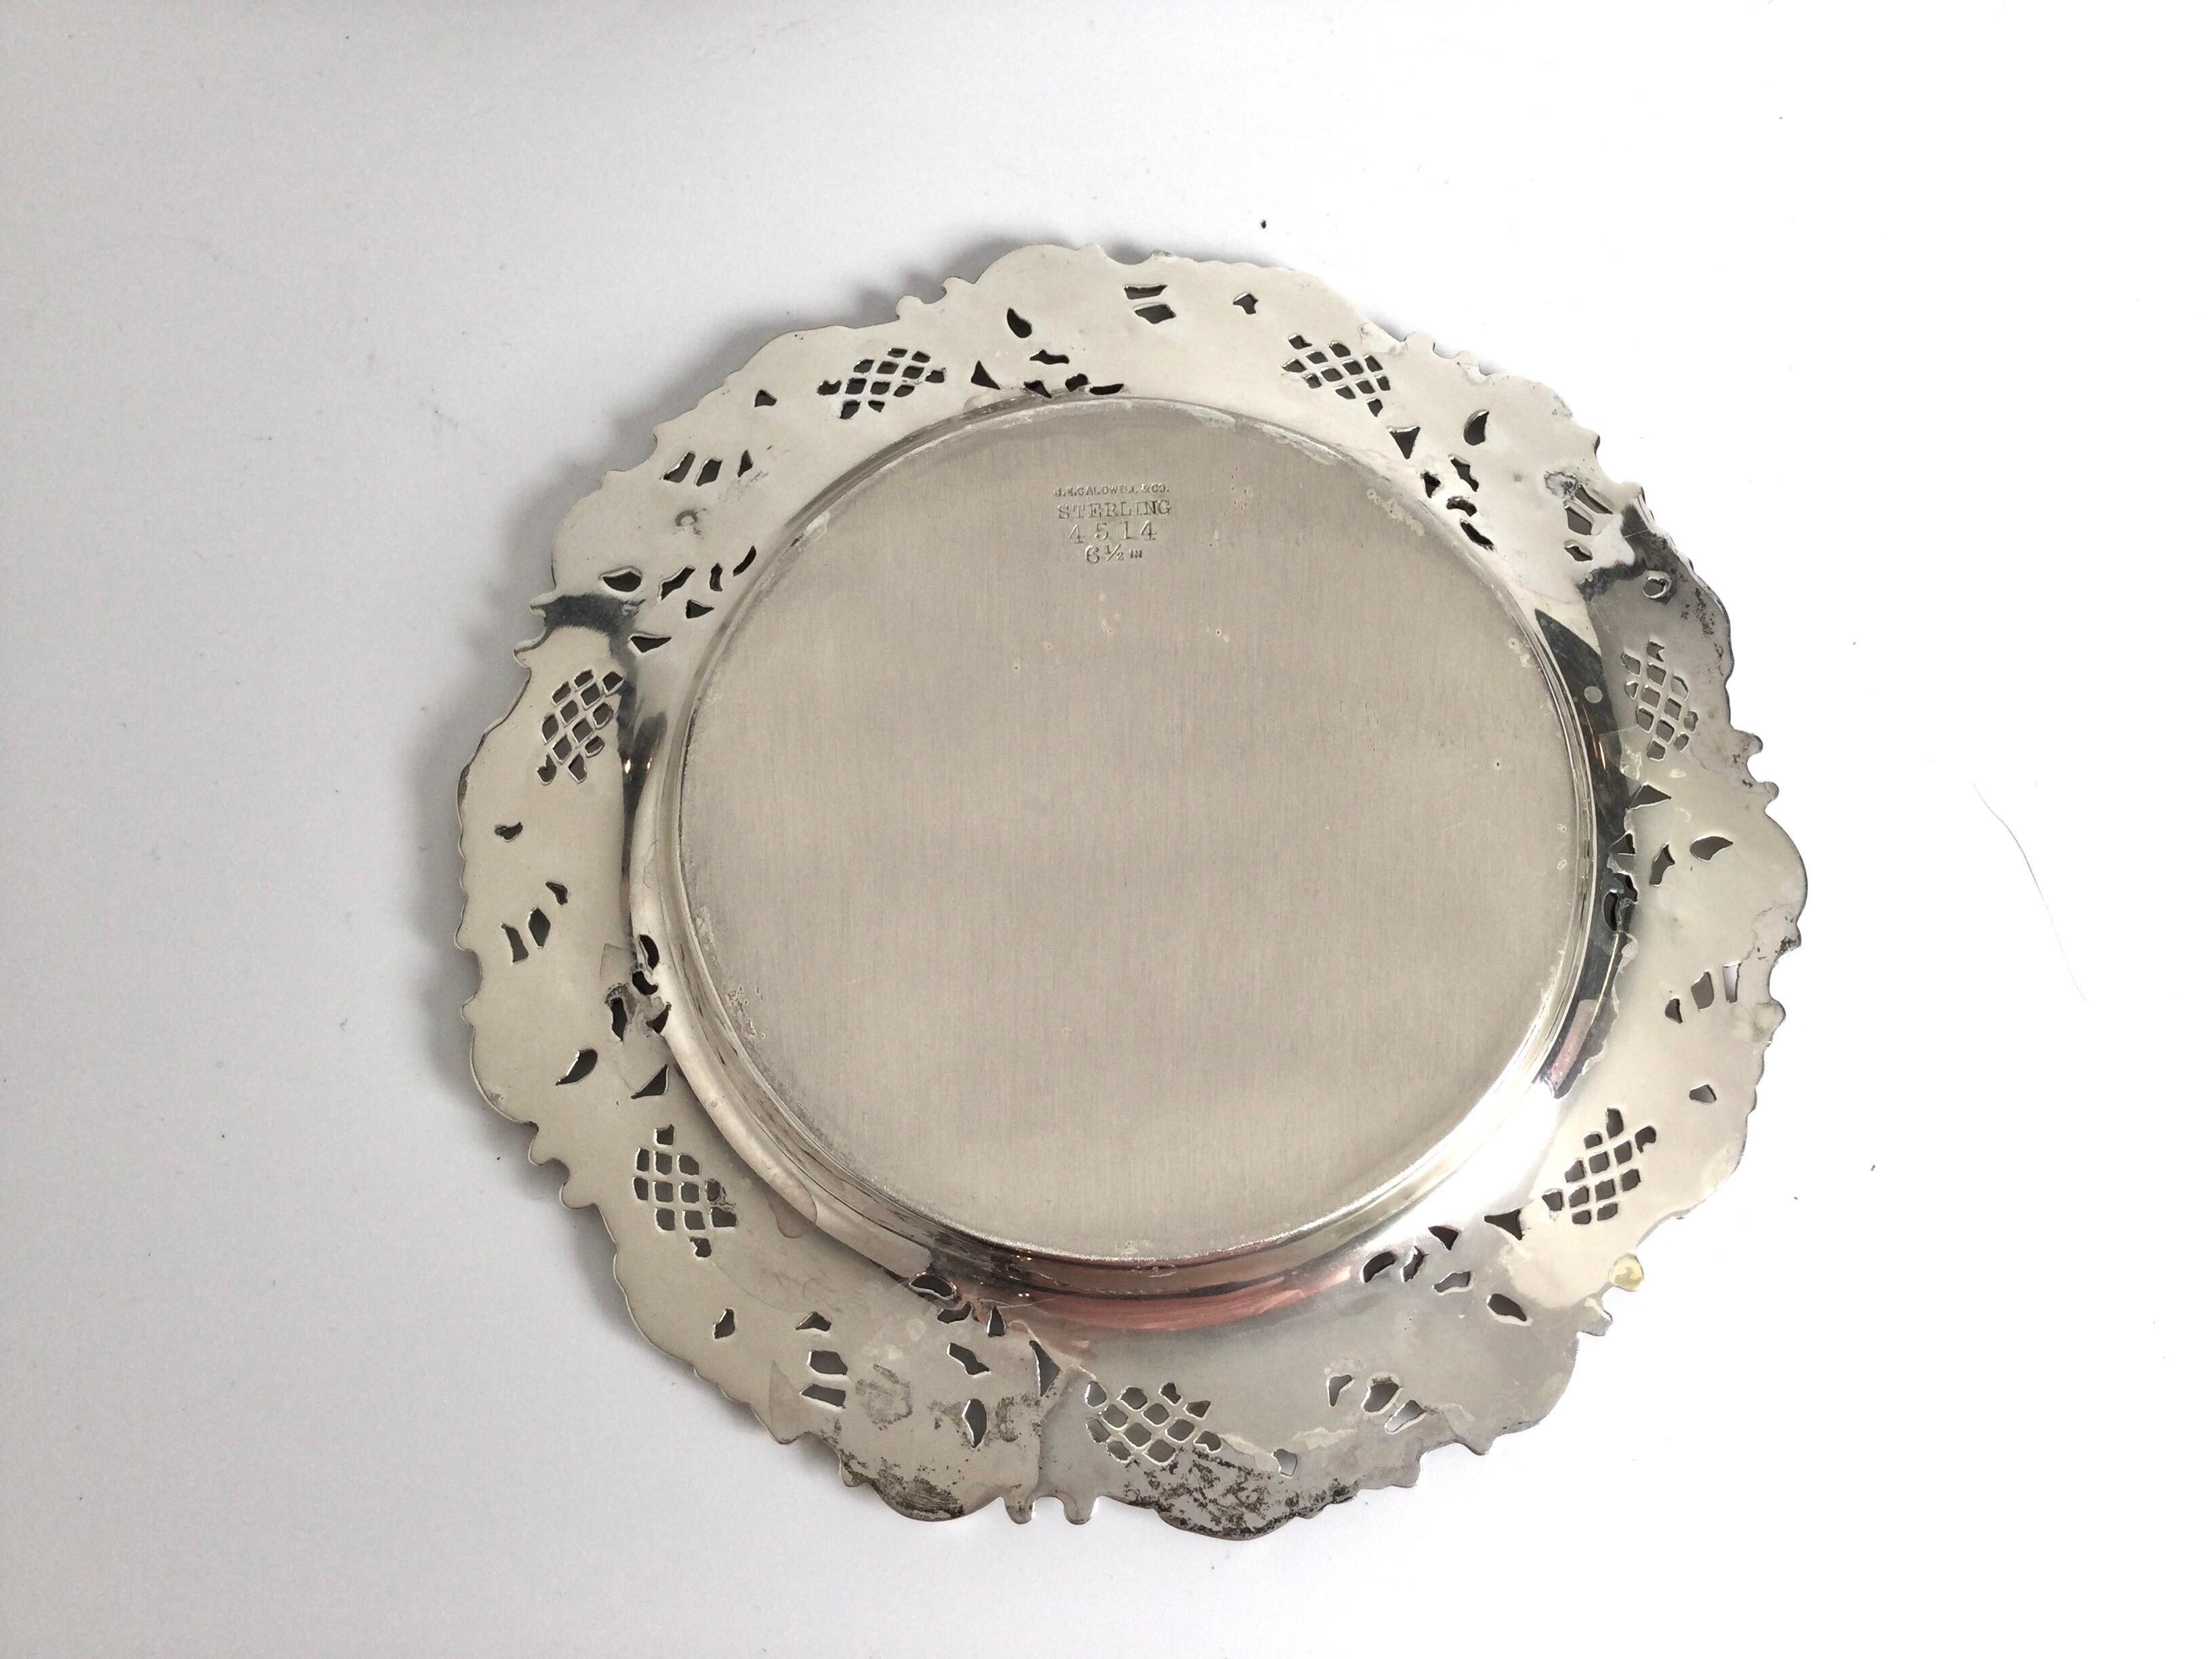 Set of 8 J. E. Caldwell Sterling Silver Bread or Cake Plates For Sale 1